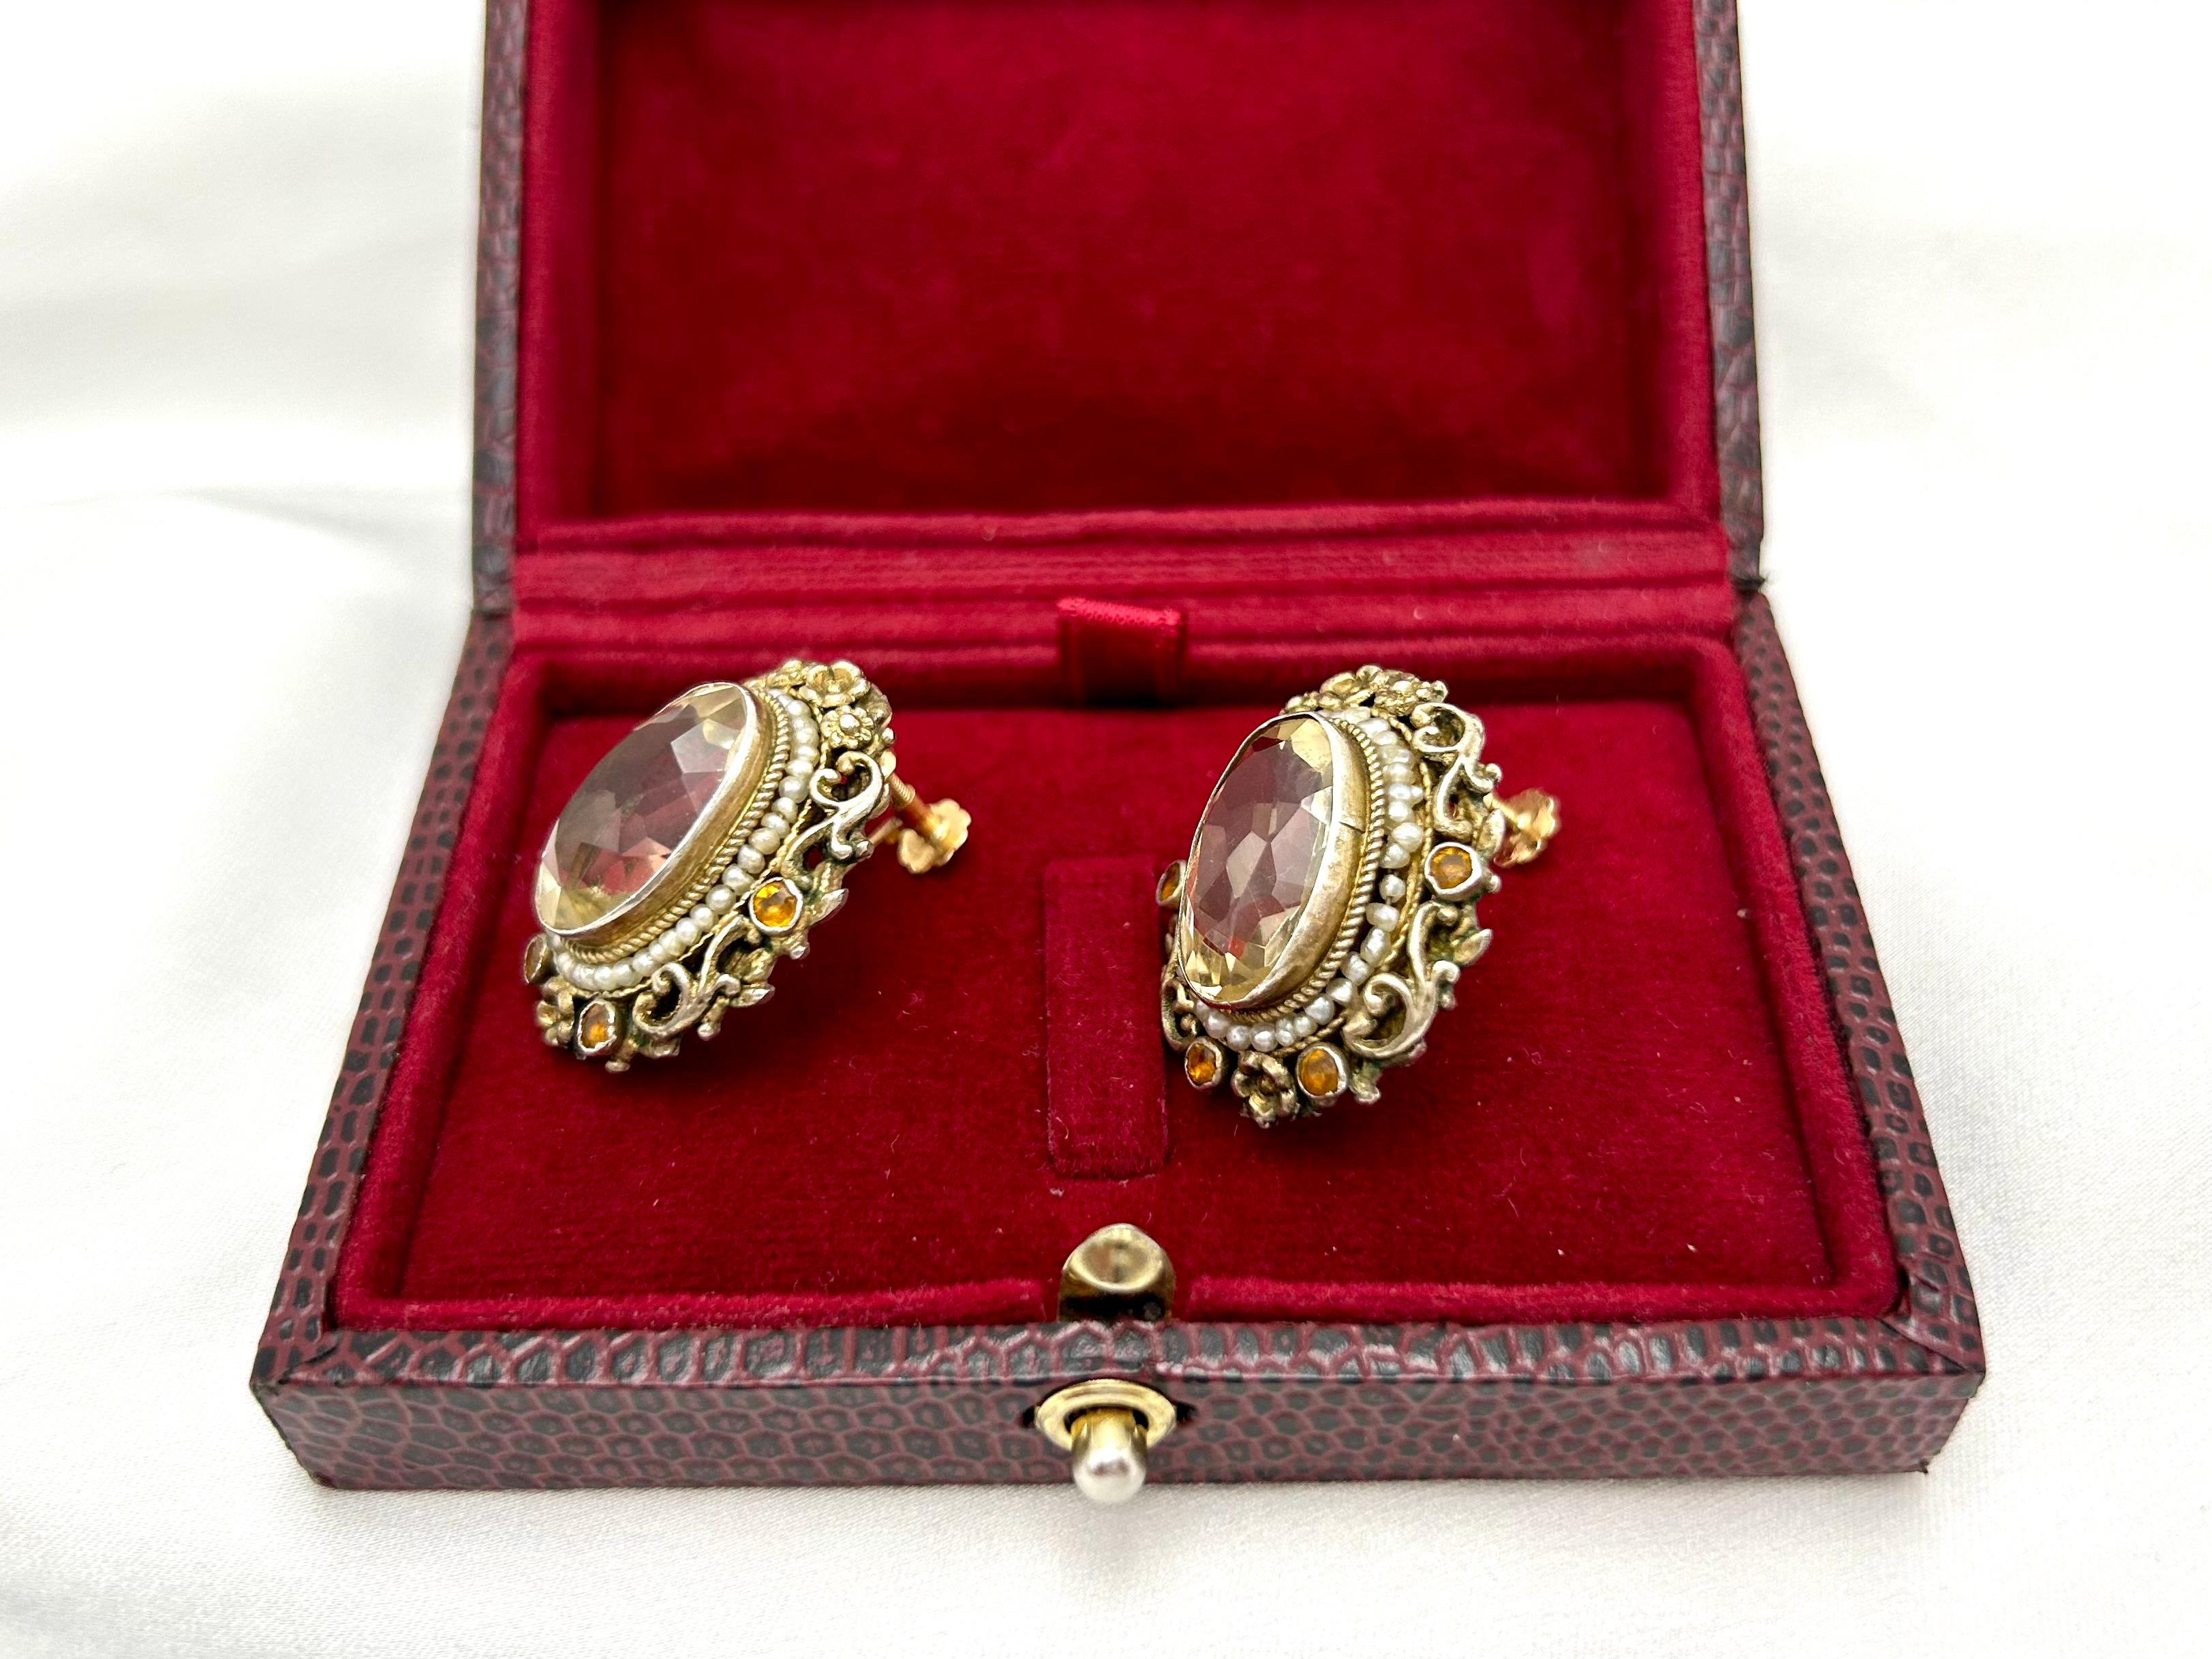 Women's Antique silver earrings with citrines, garnets and pearls, circa 1900. For Sale